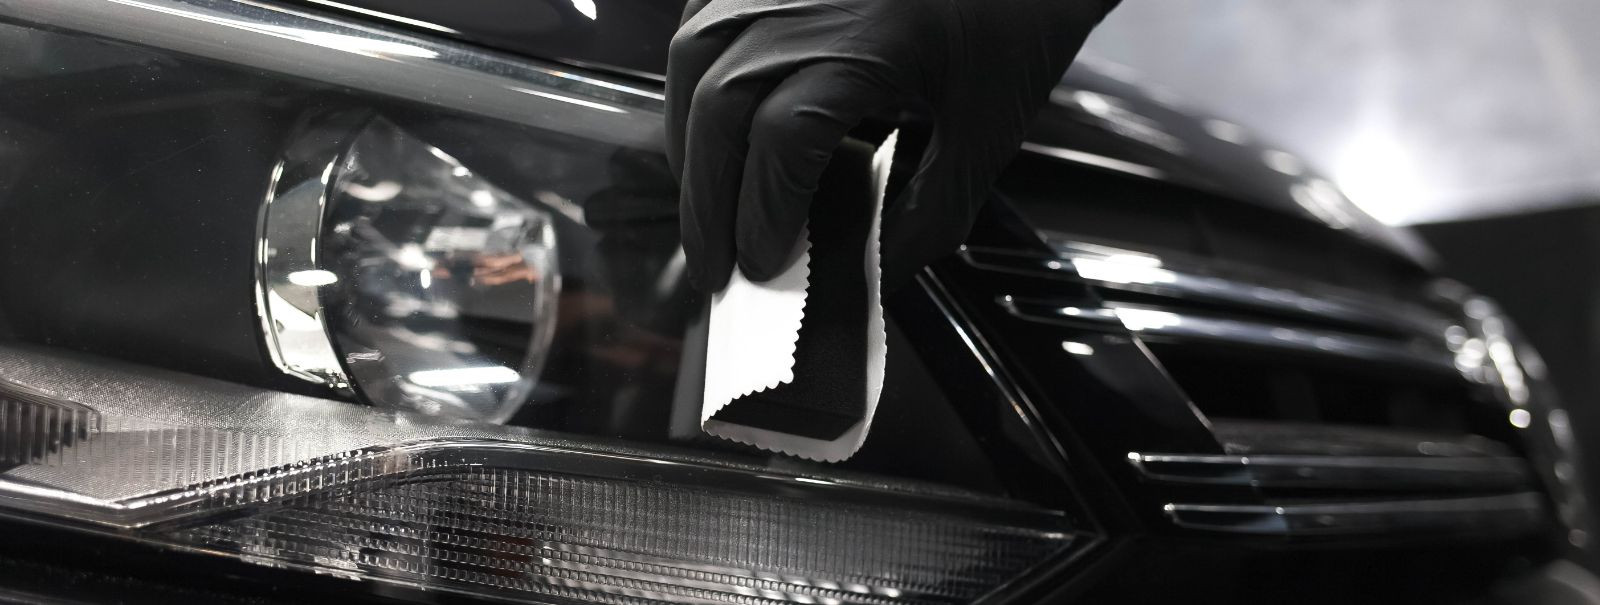 Introduction to Ceramic CoatingCeramic coating represents a revolutionary advancement in car care technology, offering unparalleled protection for your vehicle'